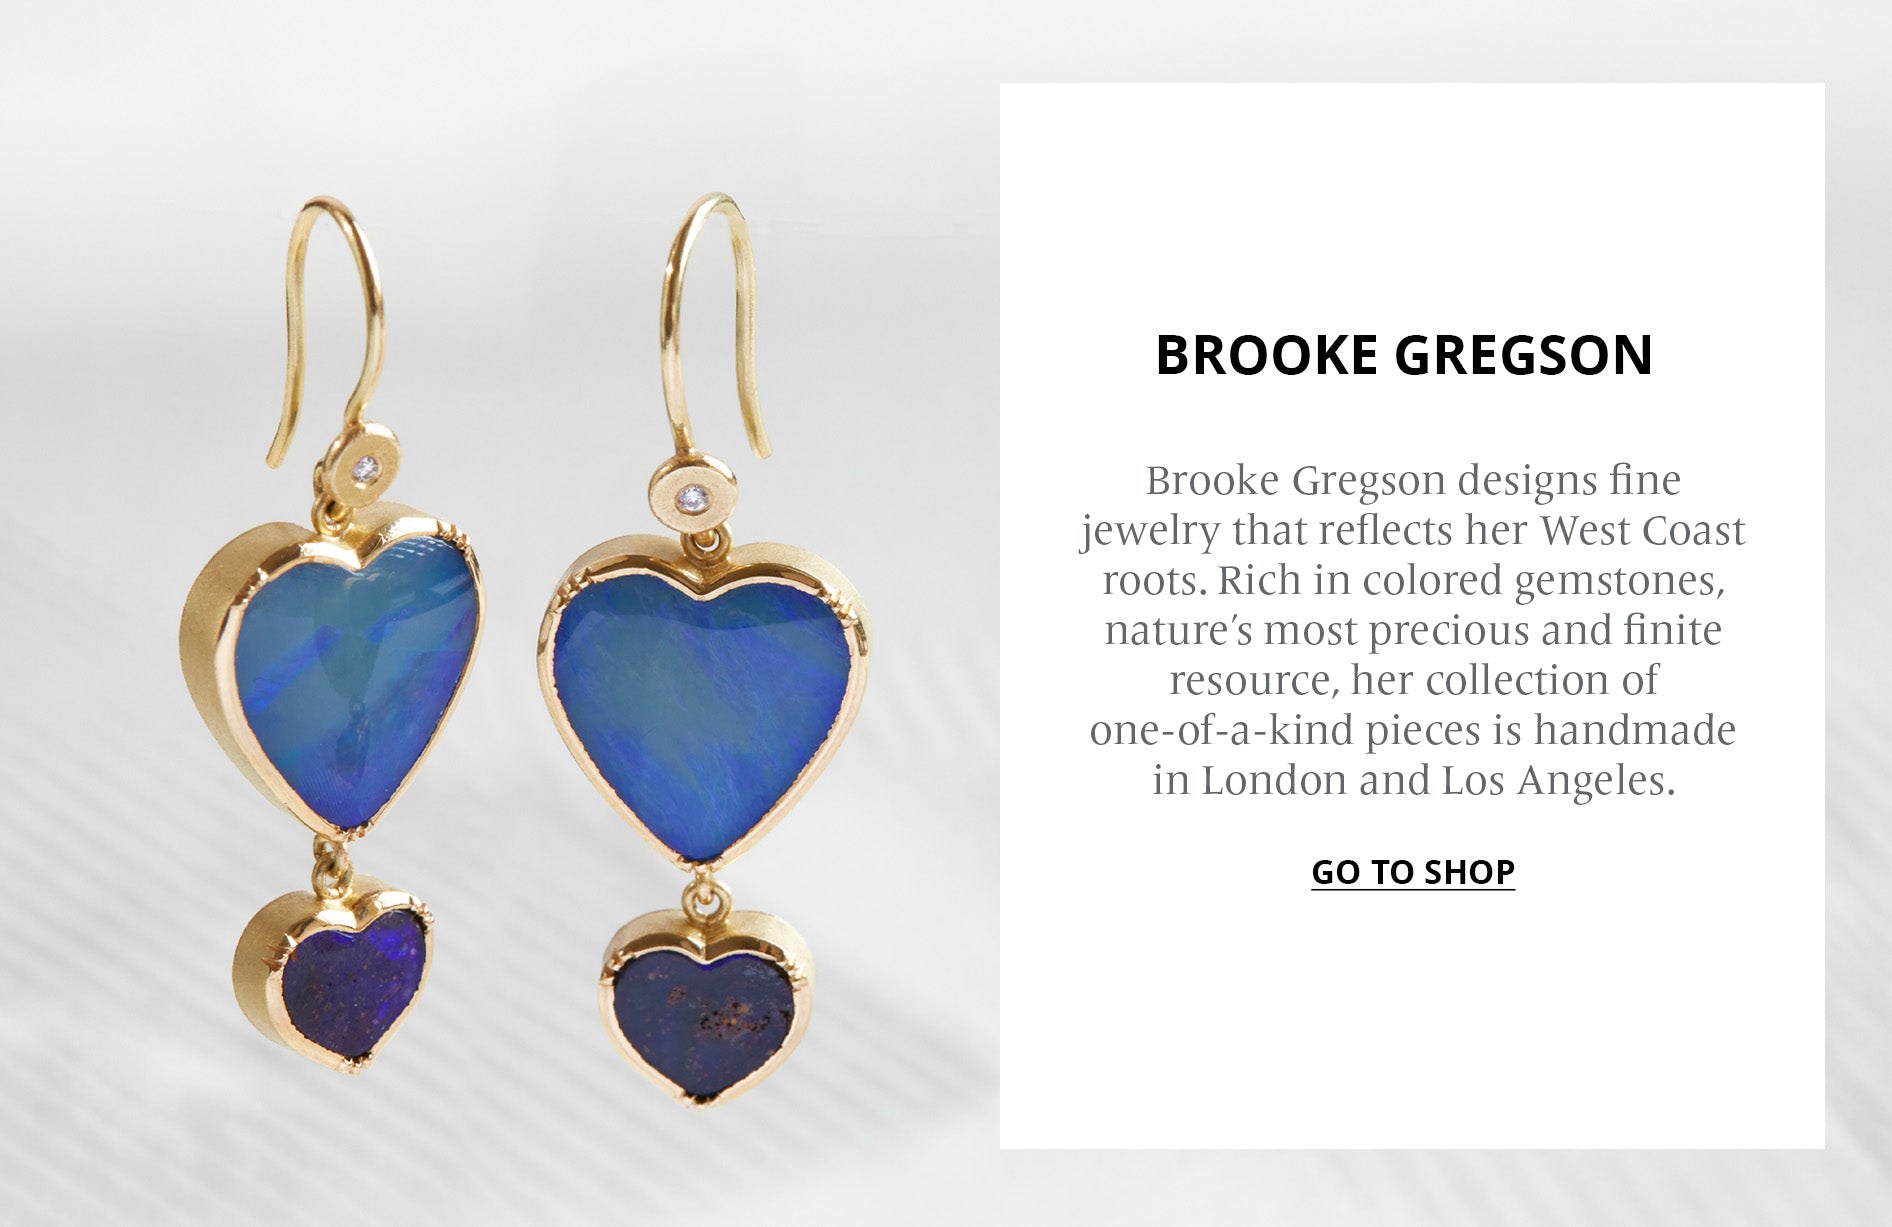 Broken English Jewelry - Shop the West Coast Vibes of Brooke Gregson - earrings, rings, necklaces, bracelets